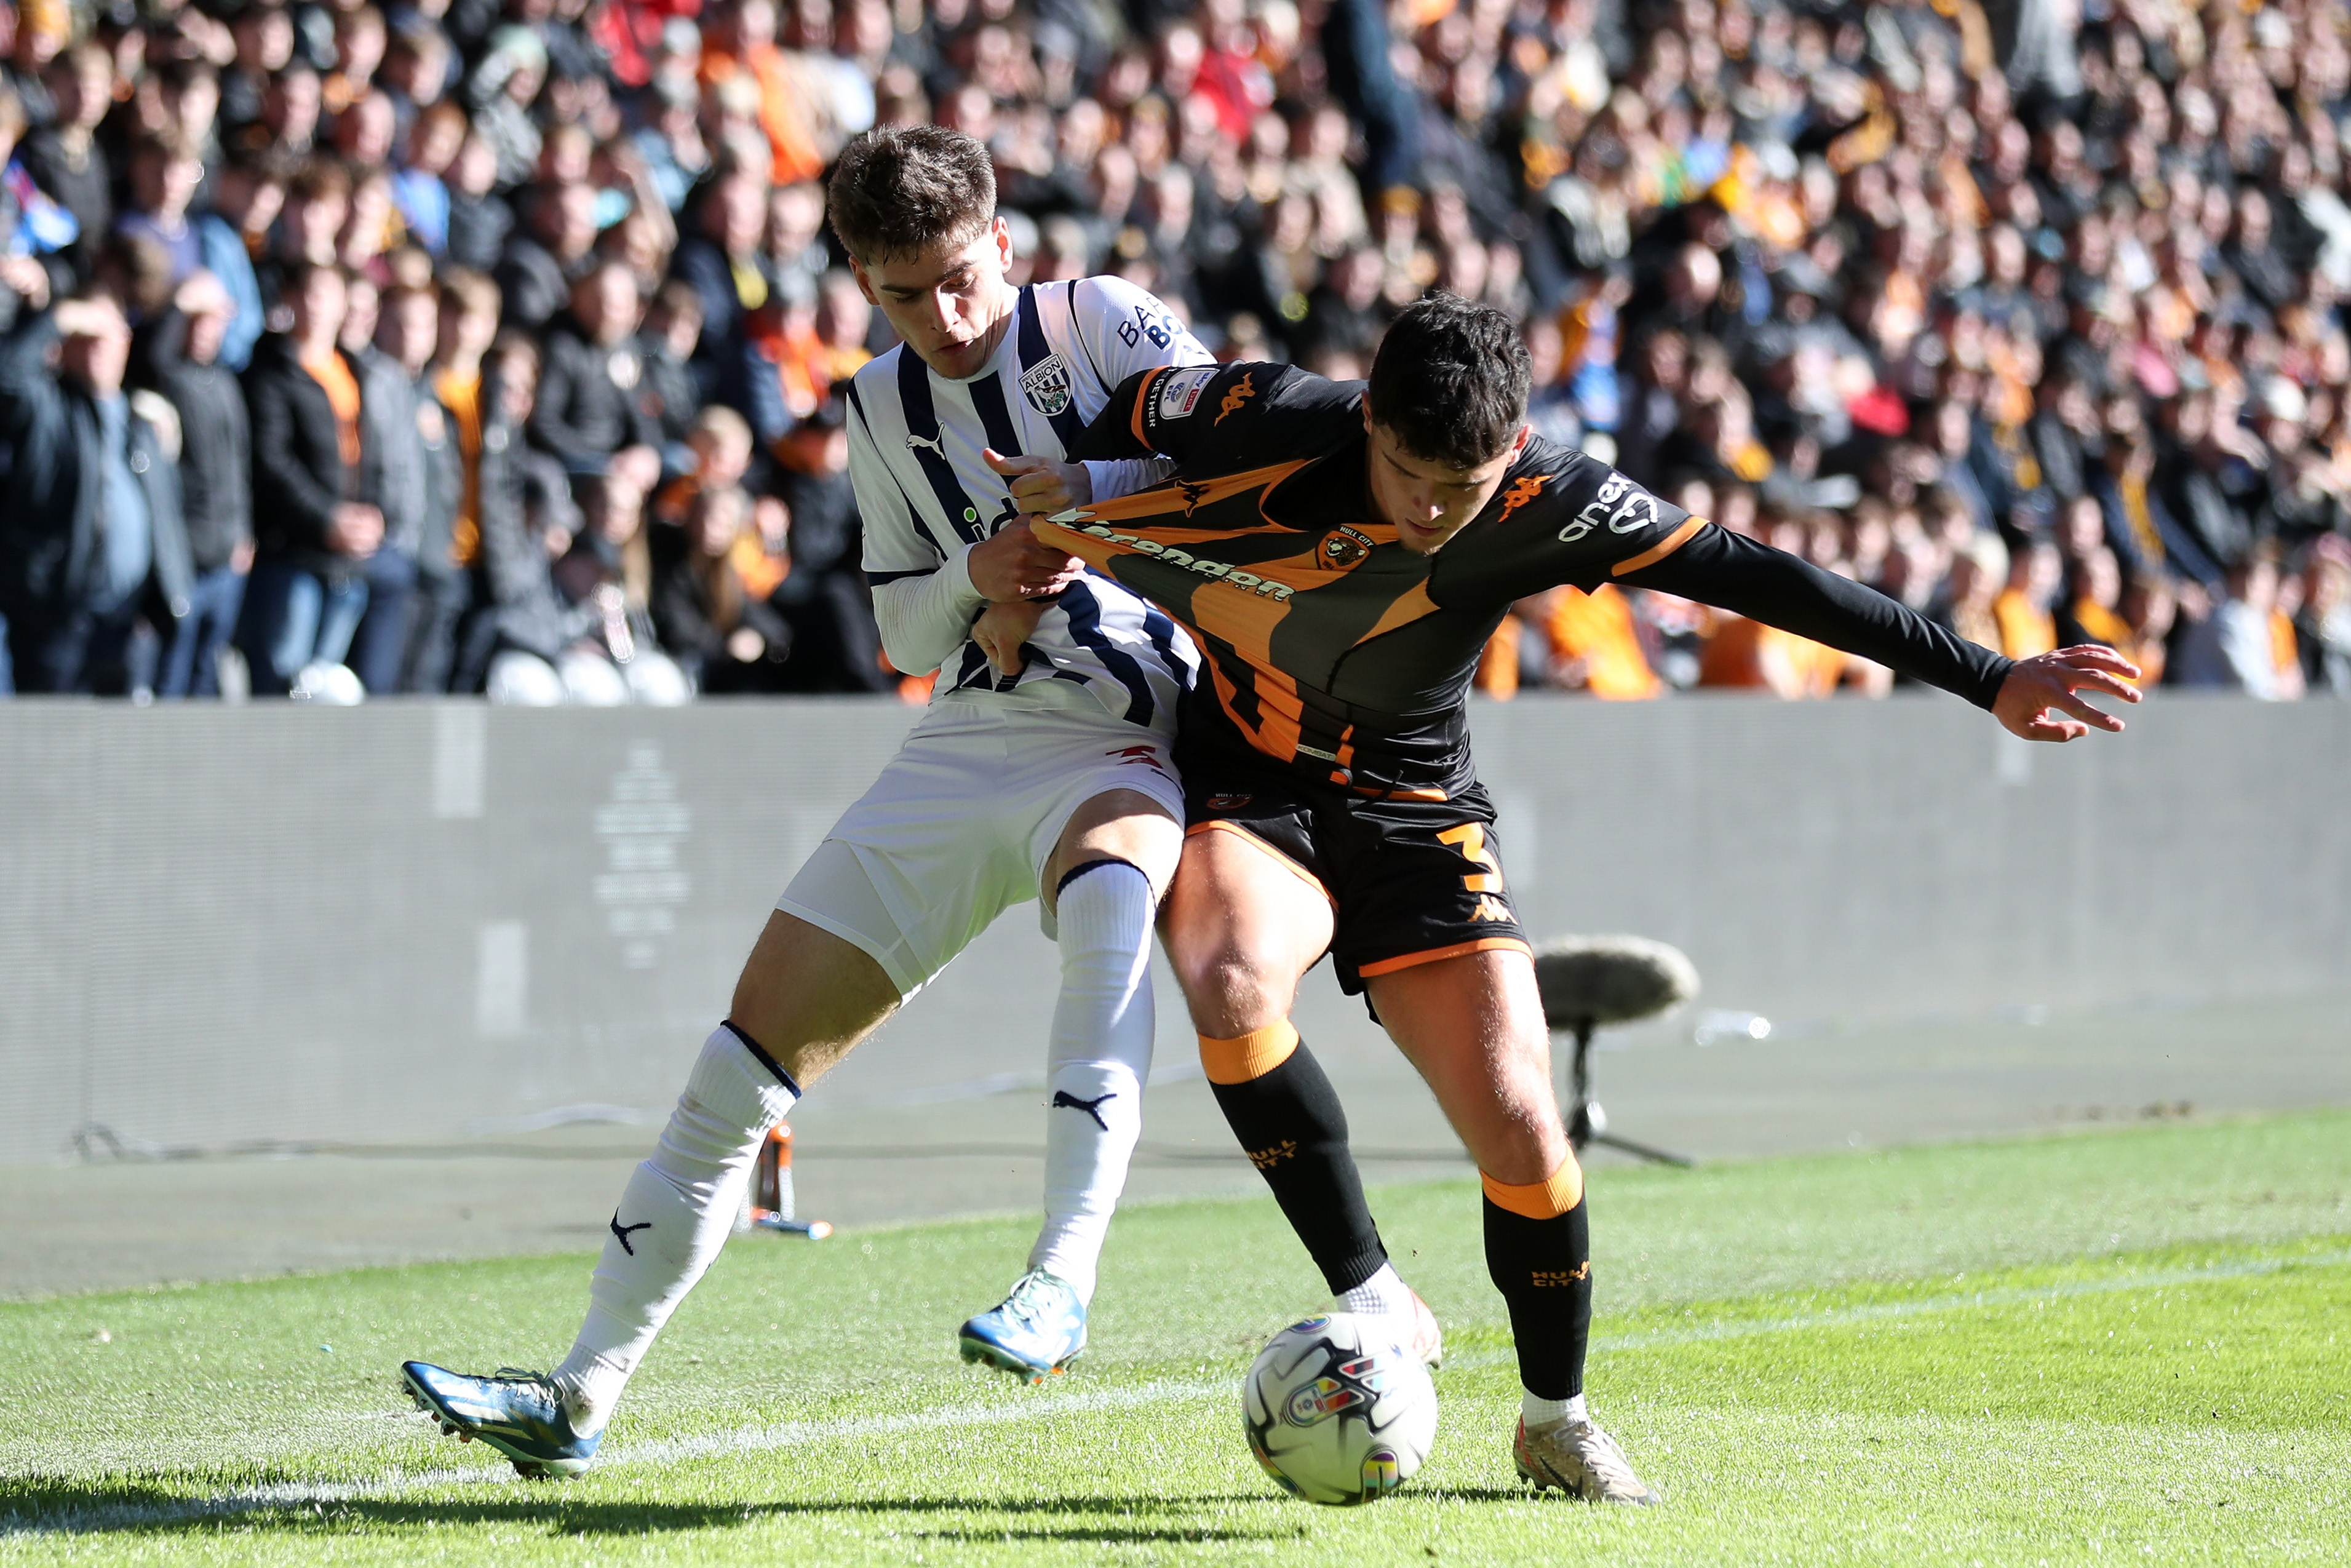 Tom Fellows battles for the ball with a Hull City player